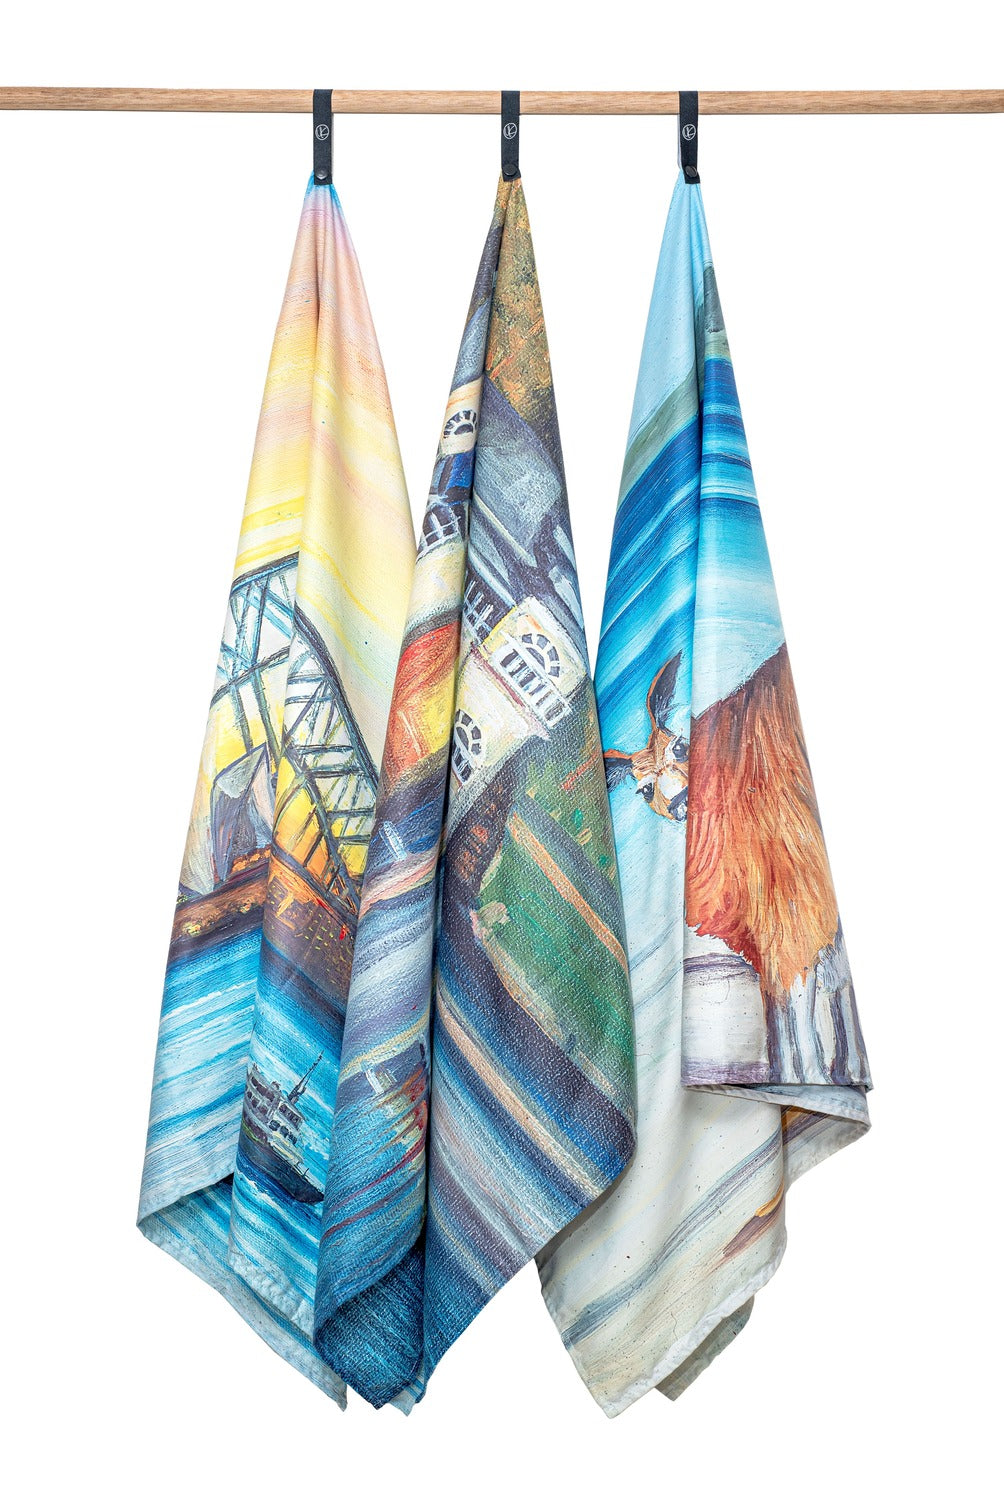 Sydney Harbour, Cottesloe Beach and Kangaroos Microfibre Artistic Towels hanging. Large size, 170cm x 95cm, soft touch, compact and sand free beach towel. An Aussie-inspired art showcasing magnificent landmarks and the Aussie lifestyle